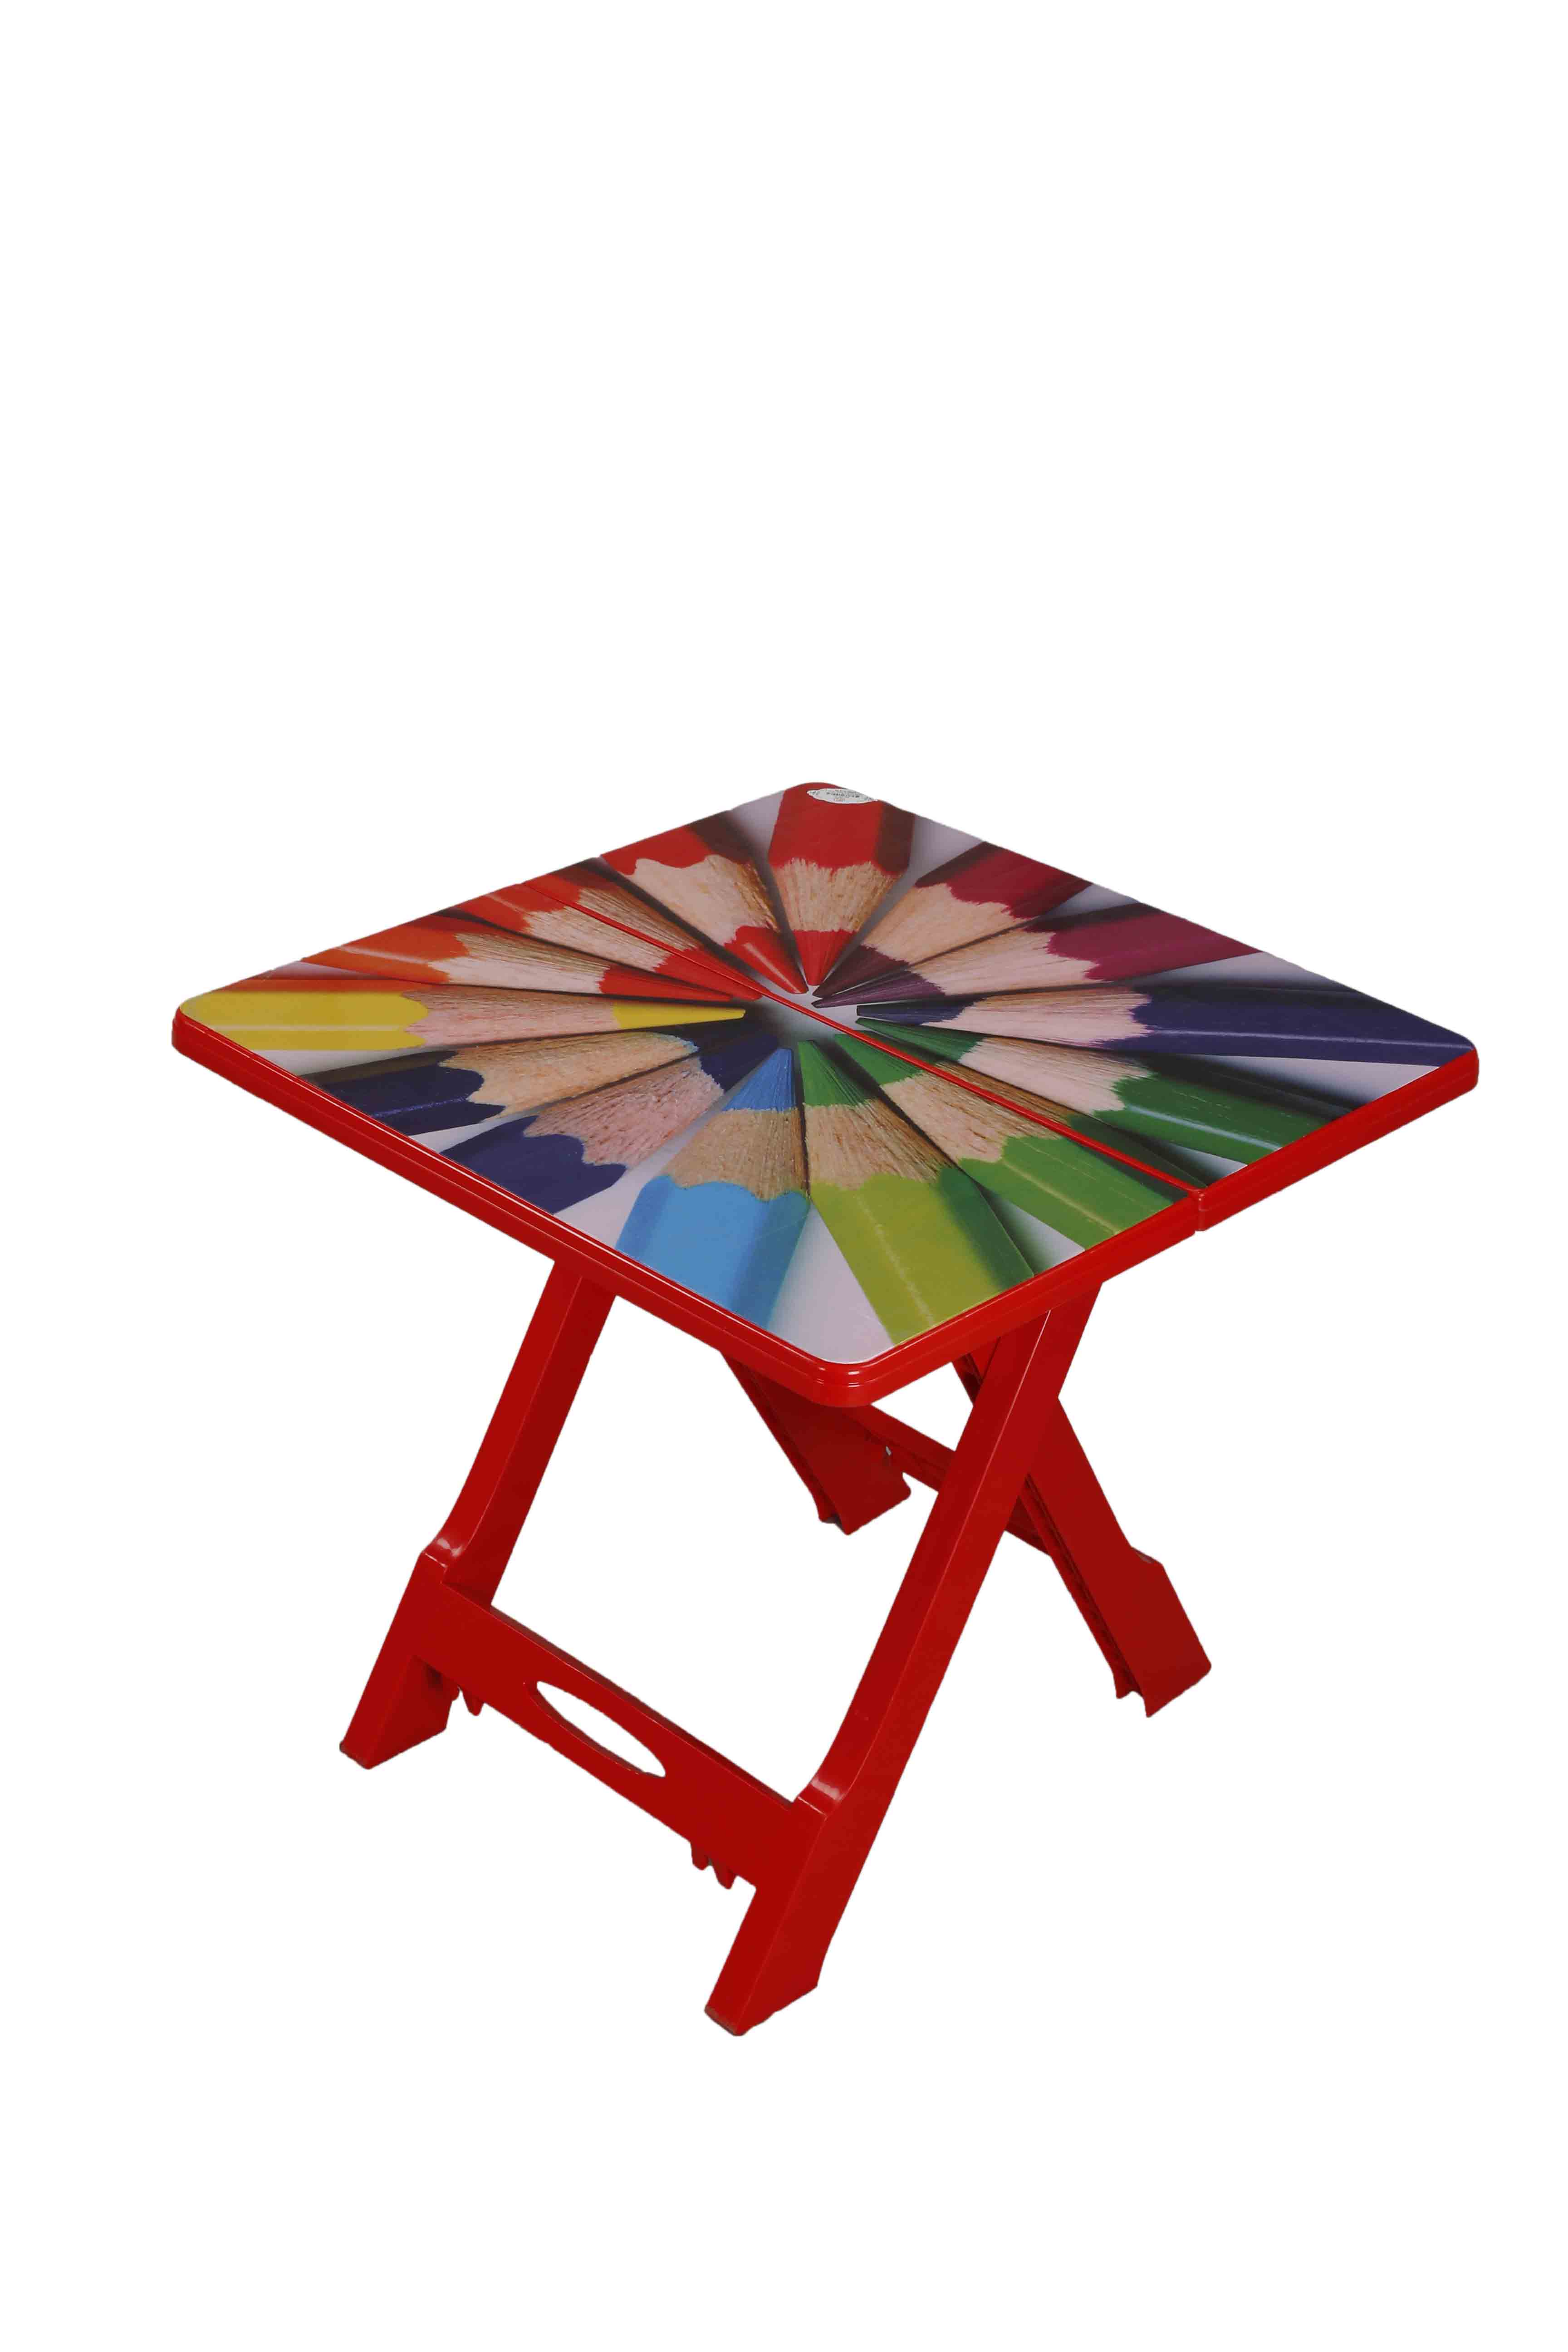 Baby Folding Table Printed Pencil-Red